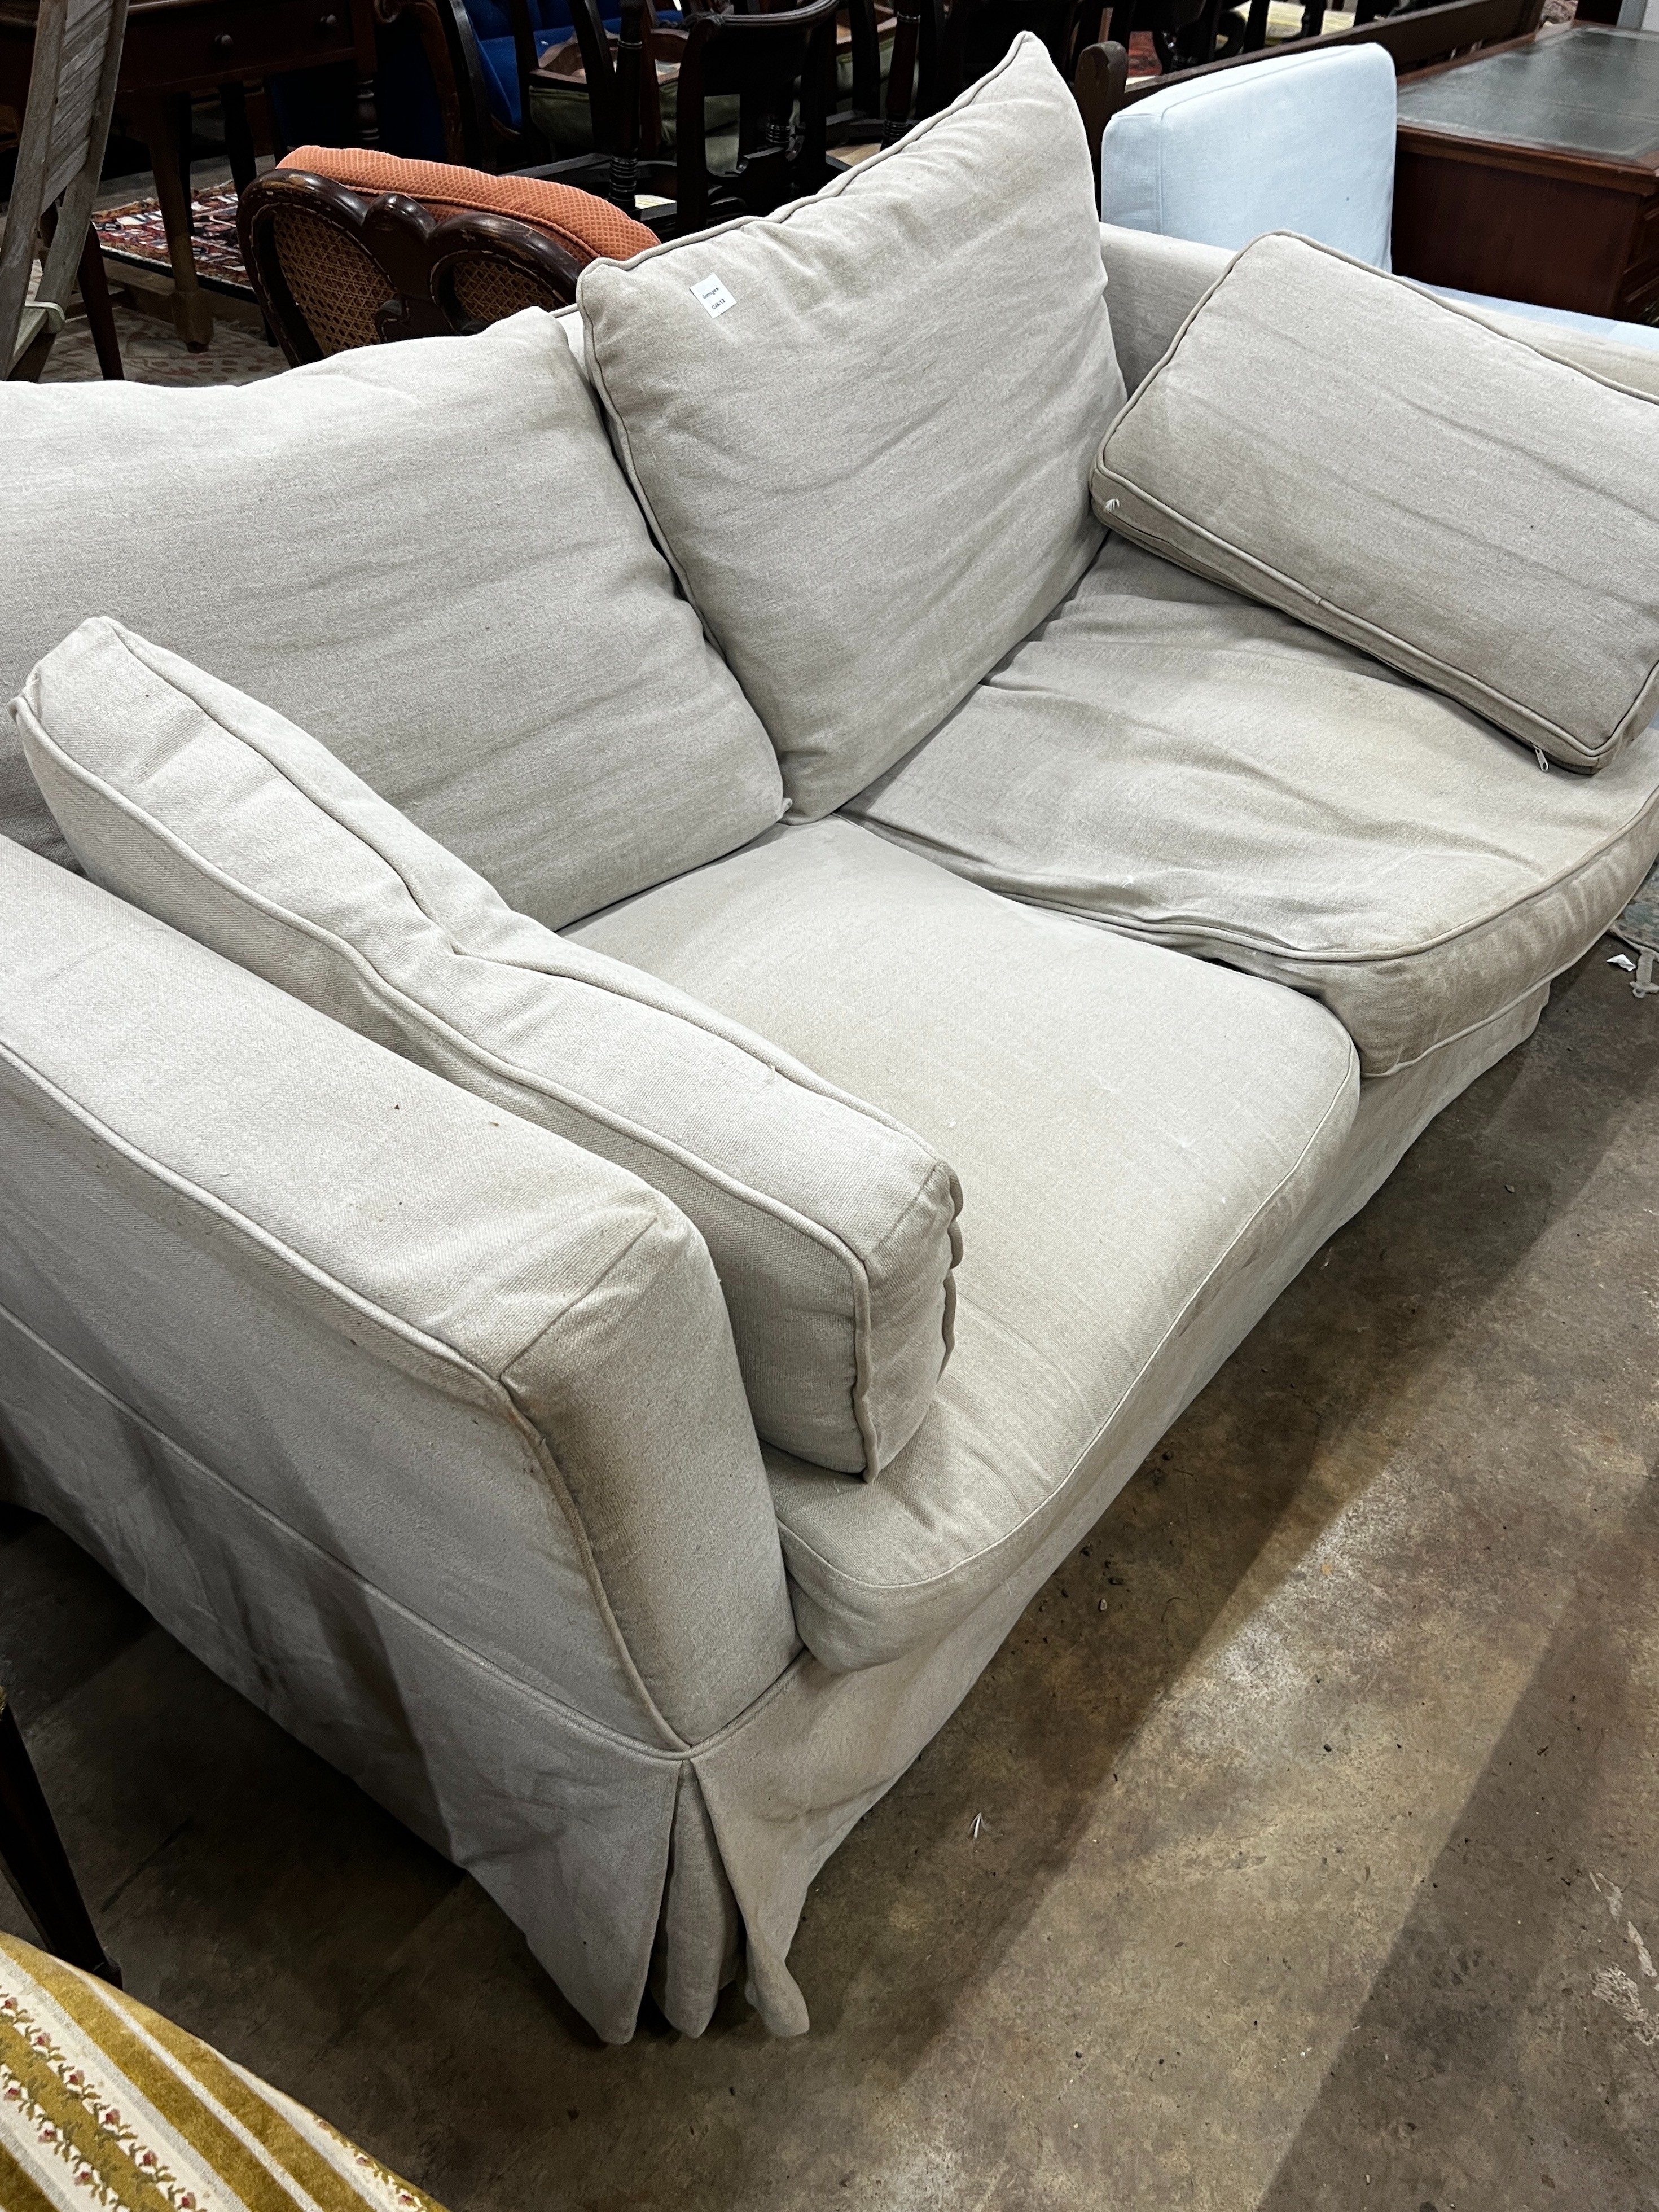 An Oka two seater settee upholstered in a natural linen fabric, length 1080, depth 98cm, height 80cm